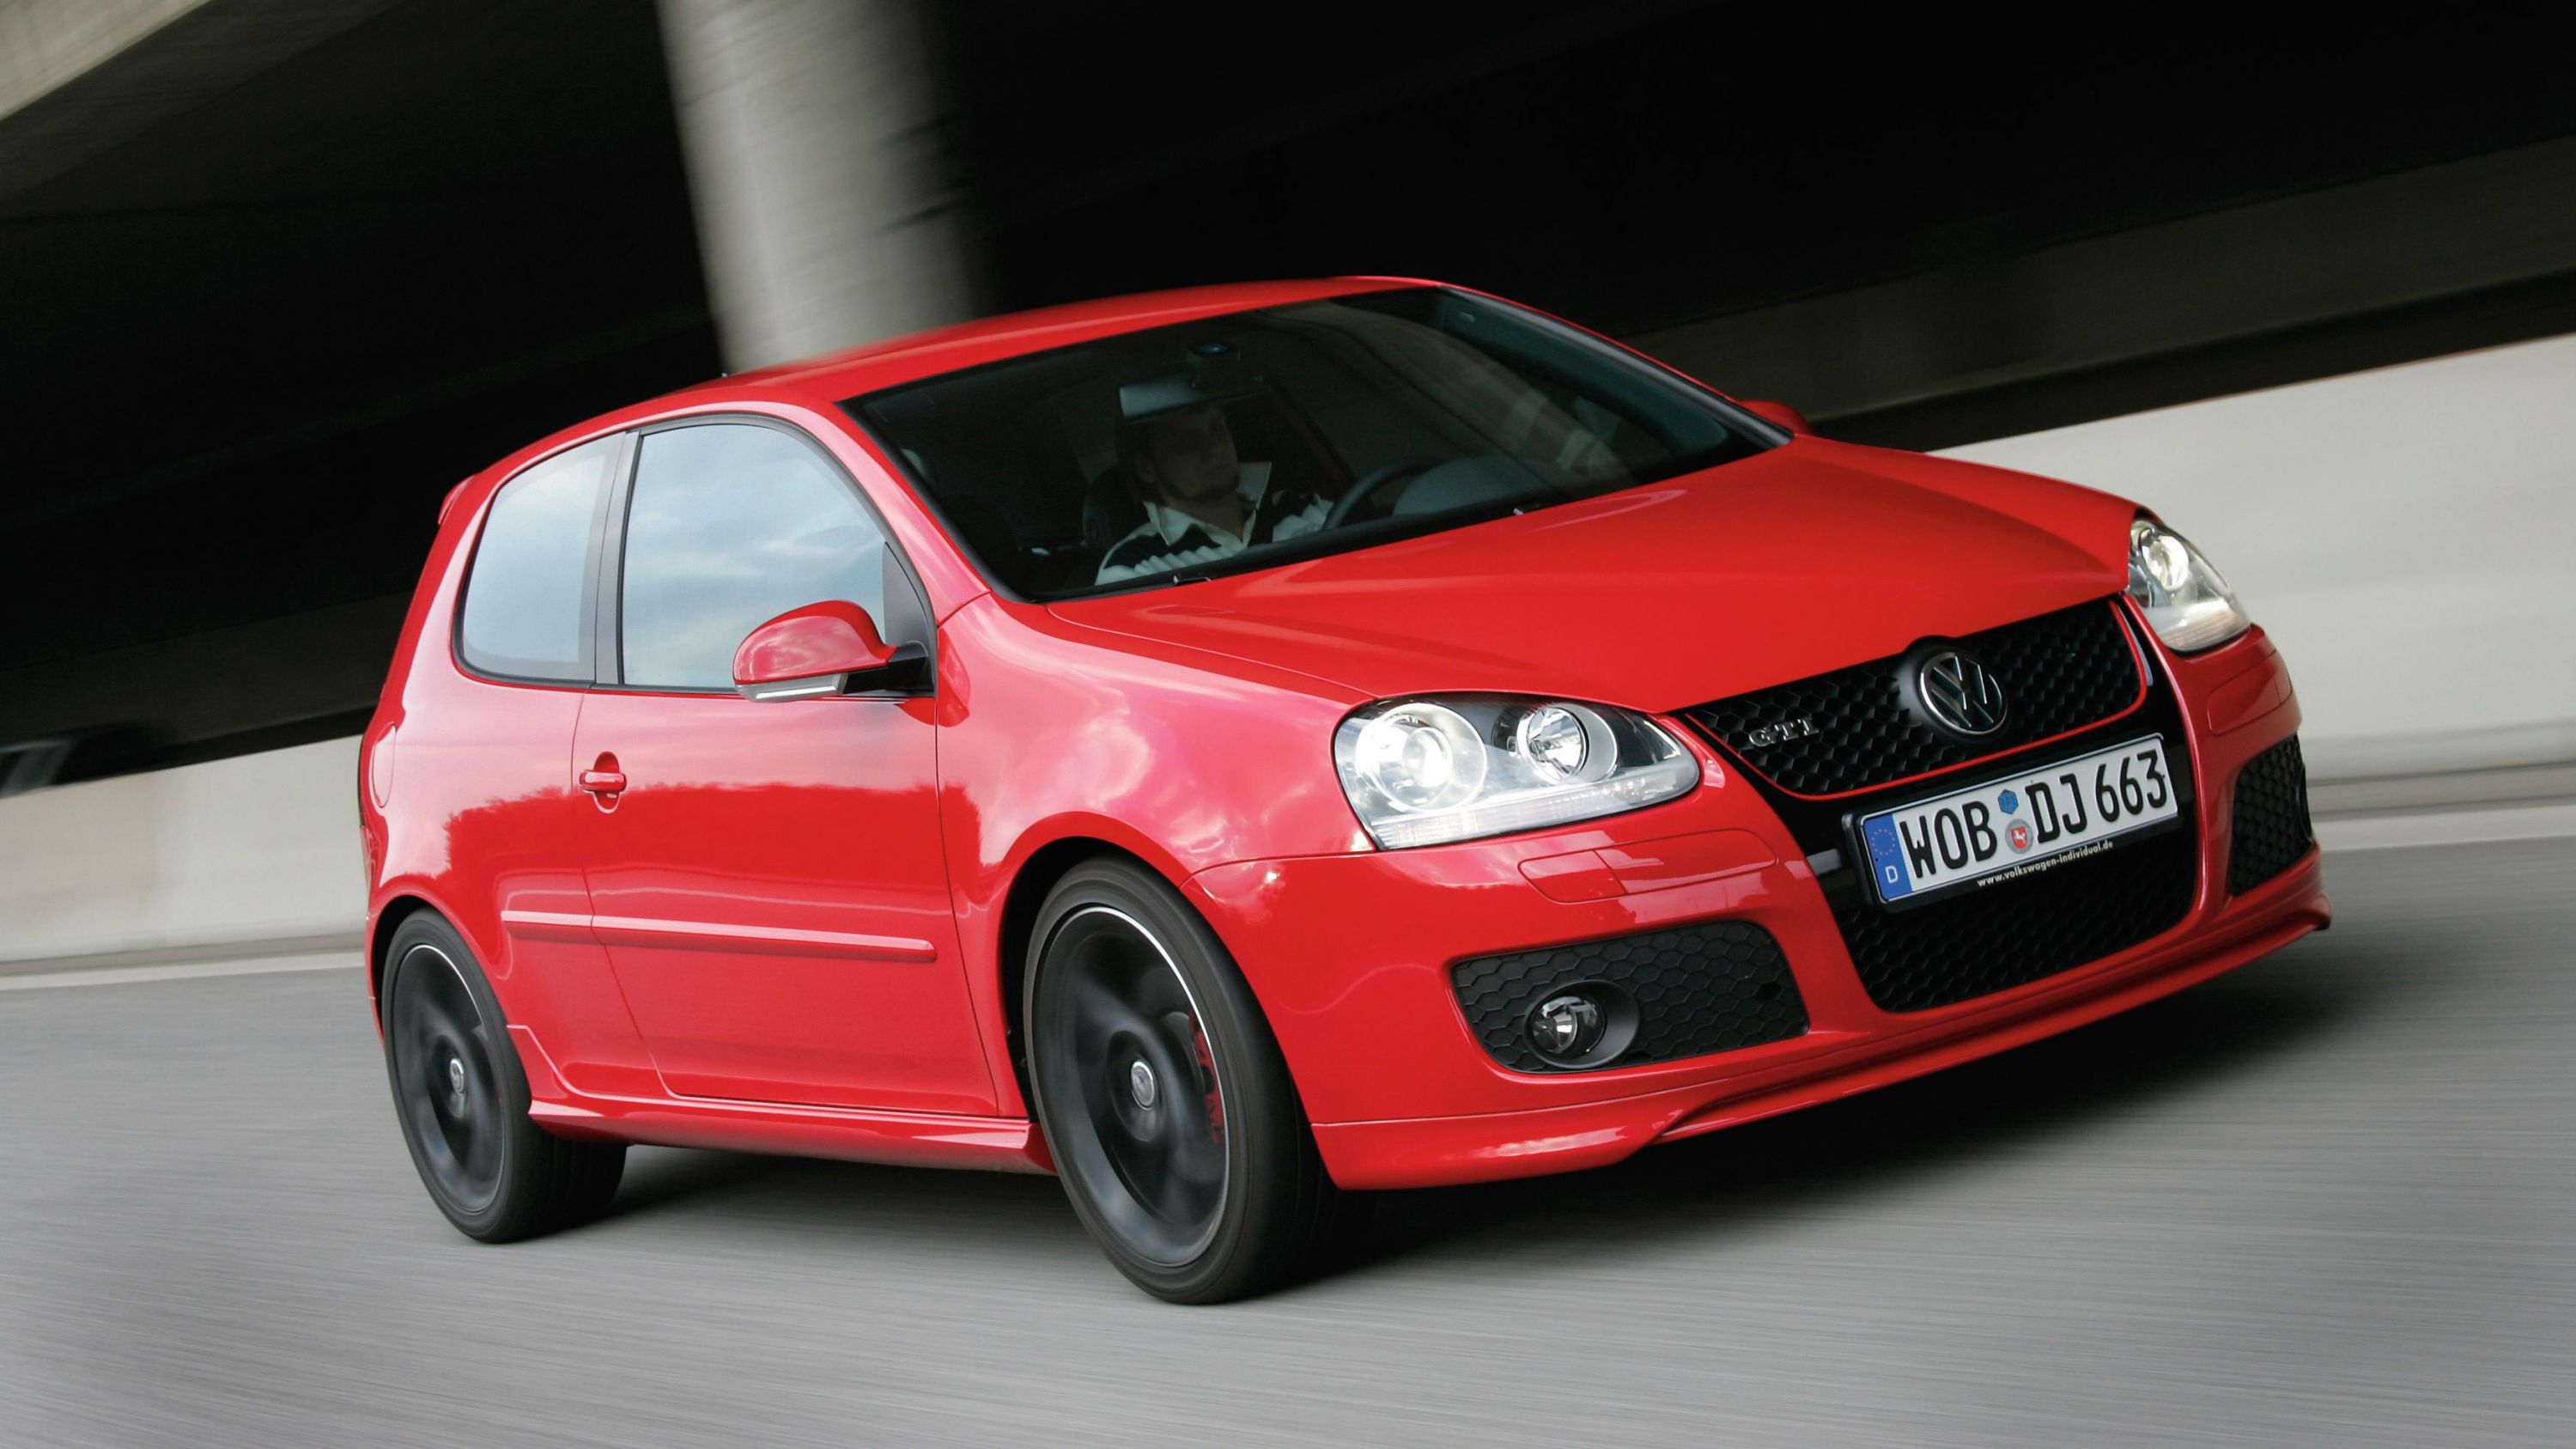 Volkswagen Golf GTI: A look back at the powered-up limited